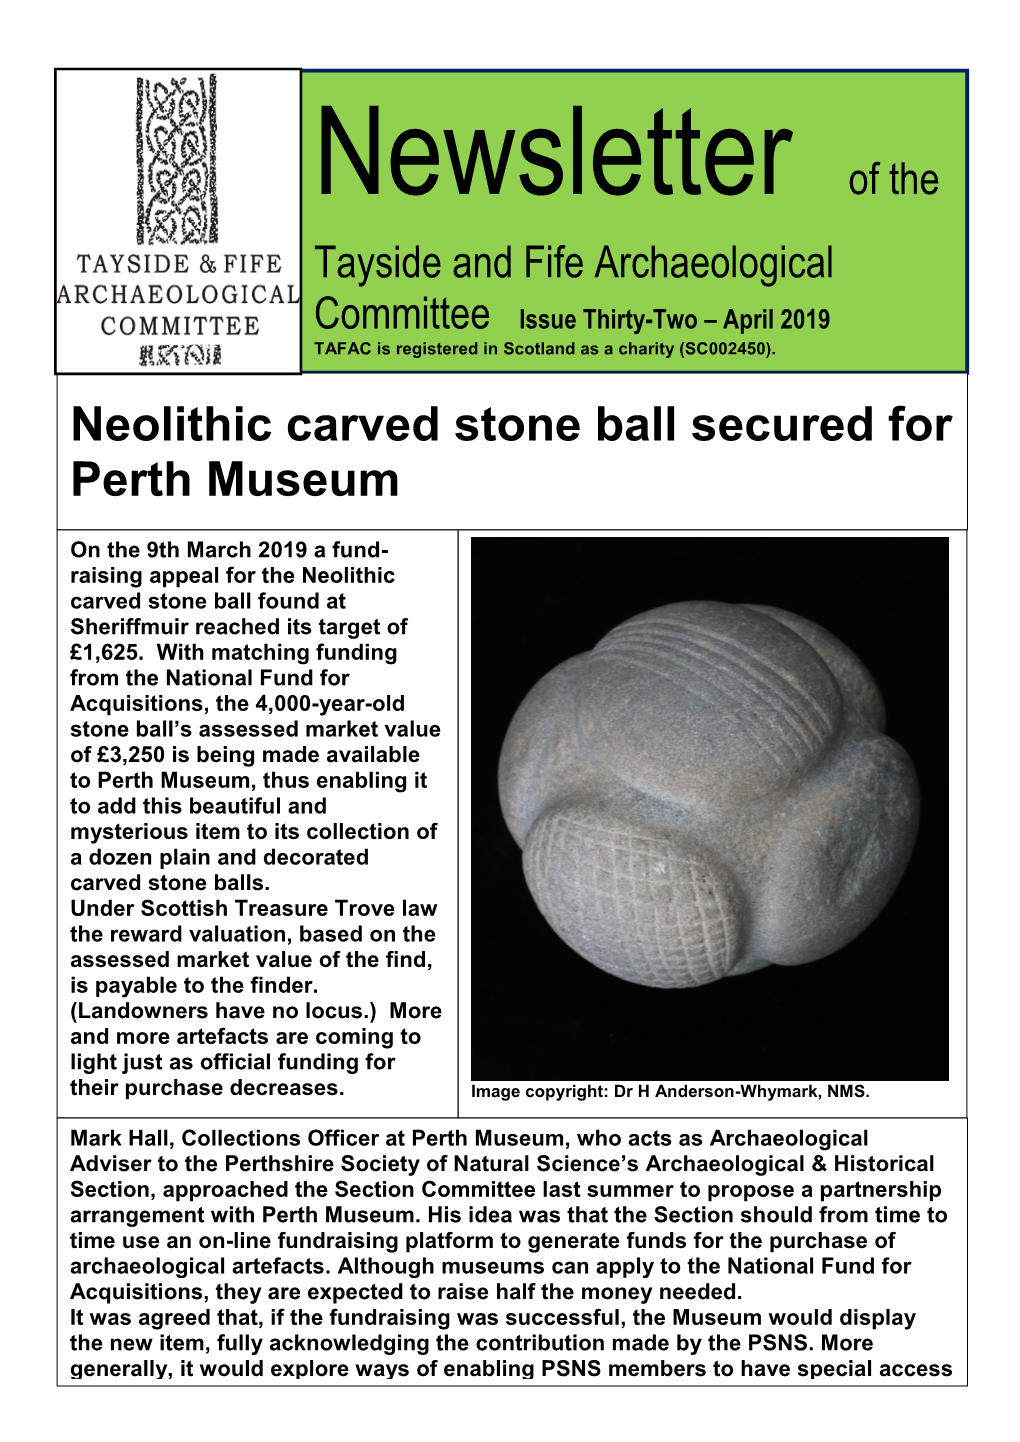 Neolithic Carved Stone Ball Secured for Perth Museum